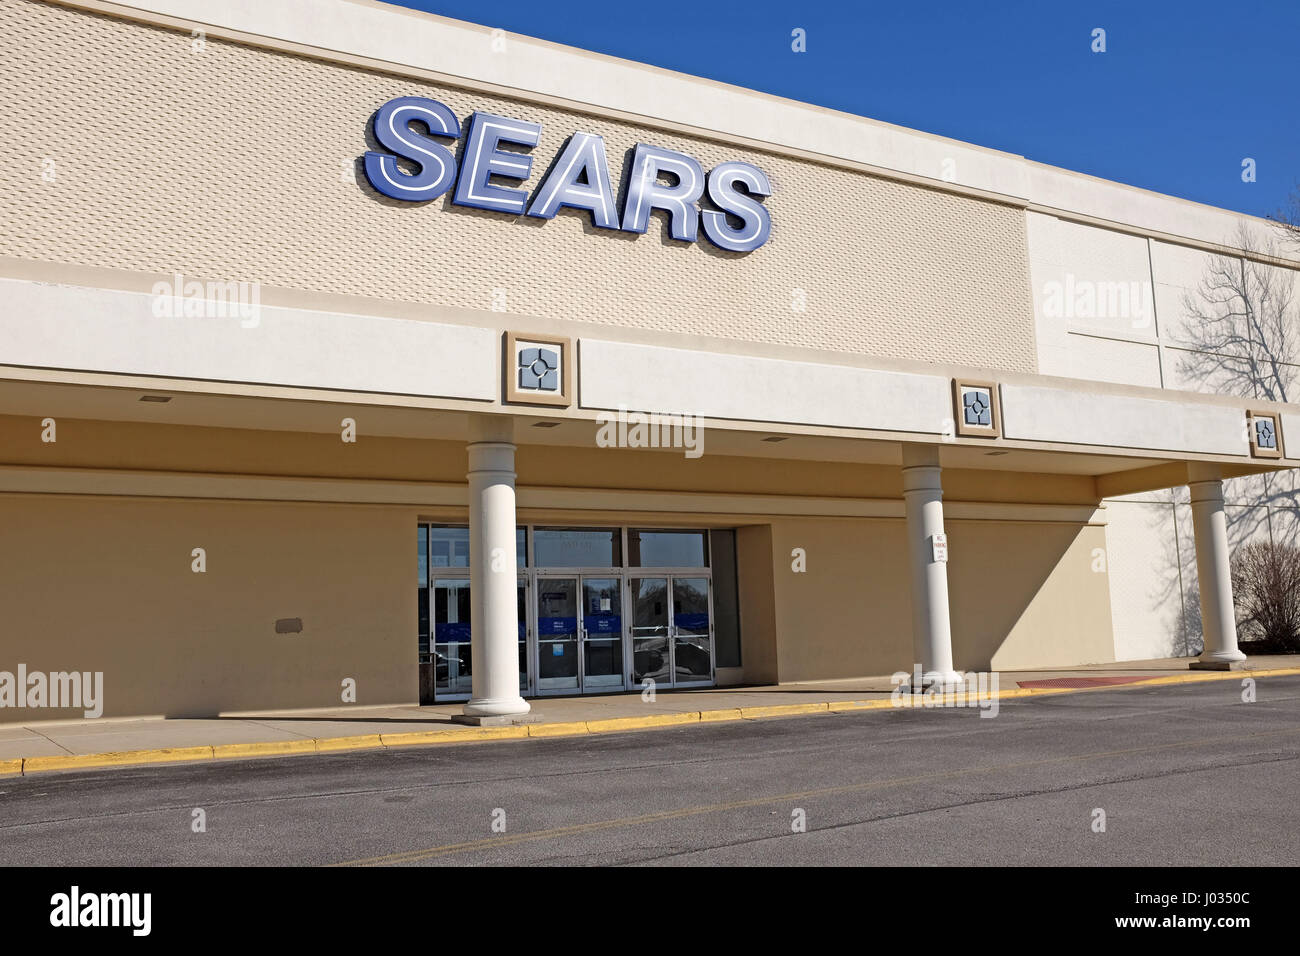 Sears storefront in Mentor, Ohio, USA Stock Photo